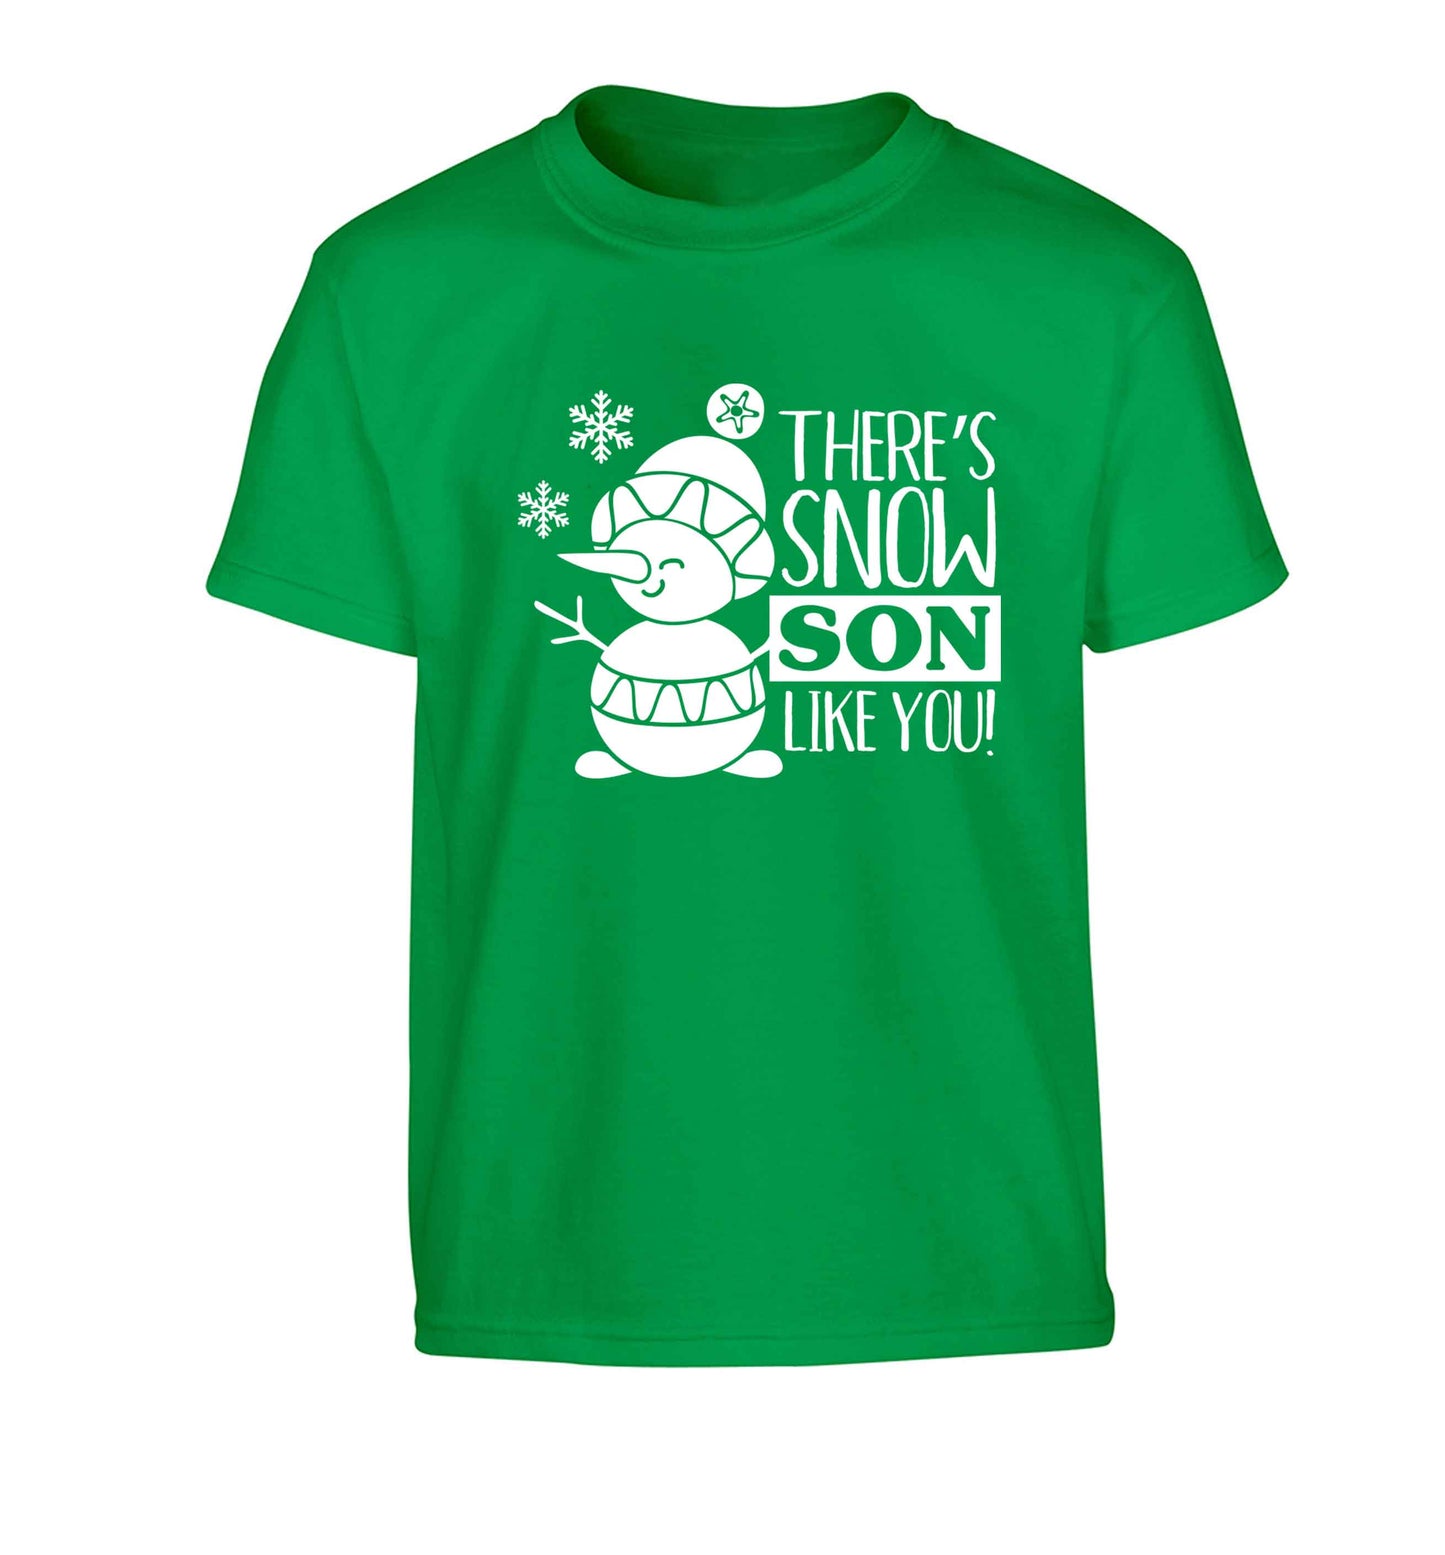 There's snow son like you Children's green Tshirt 12-13 Years